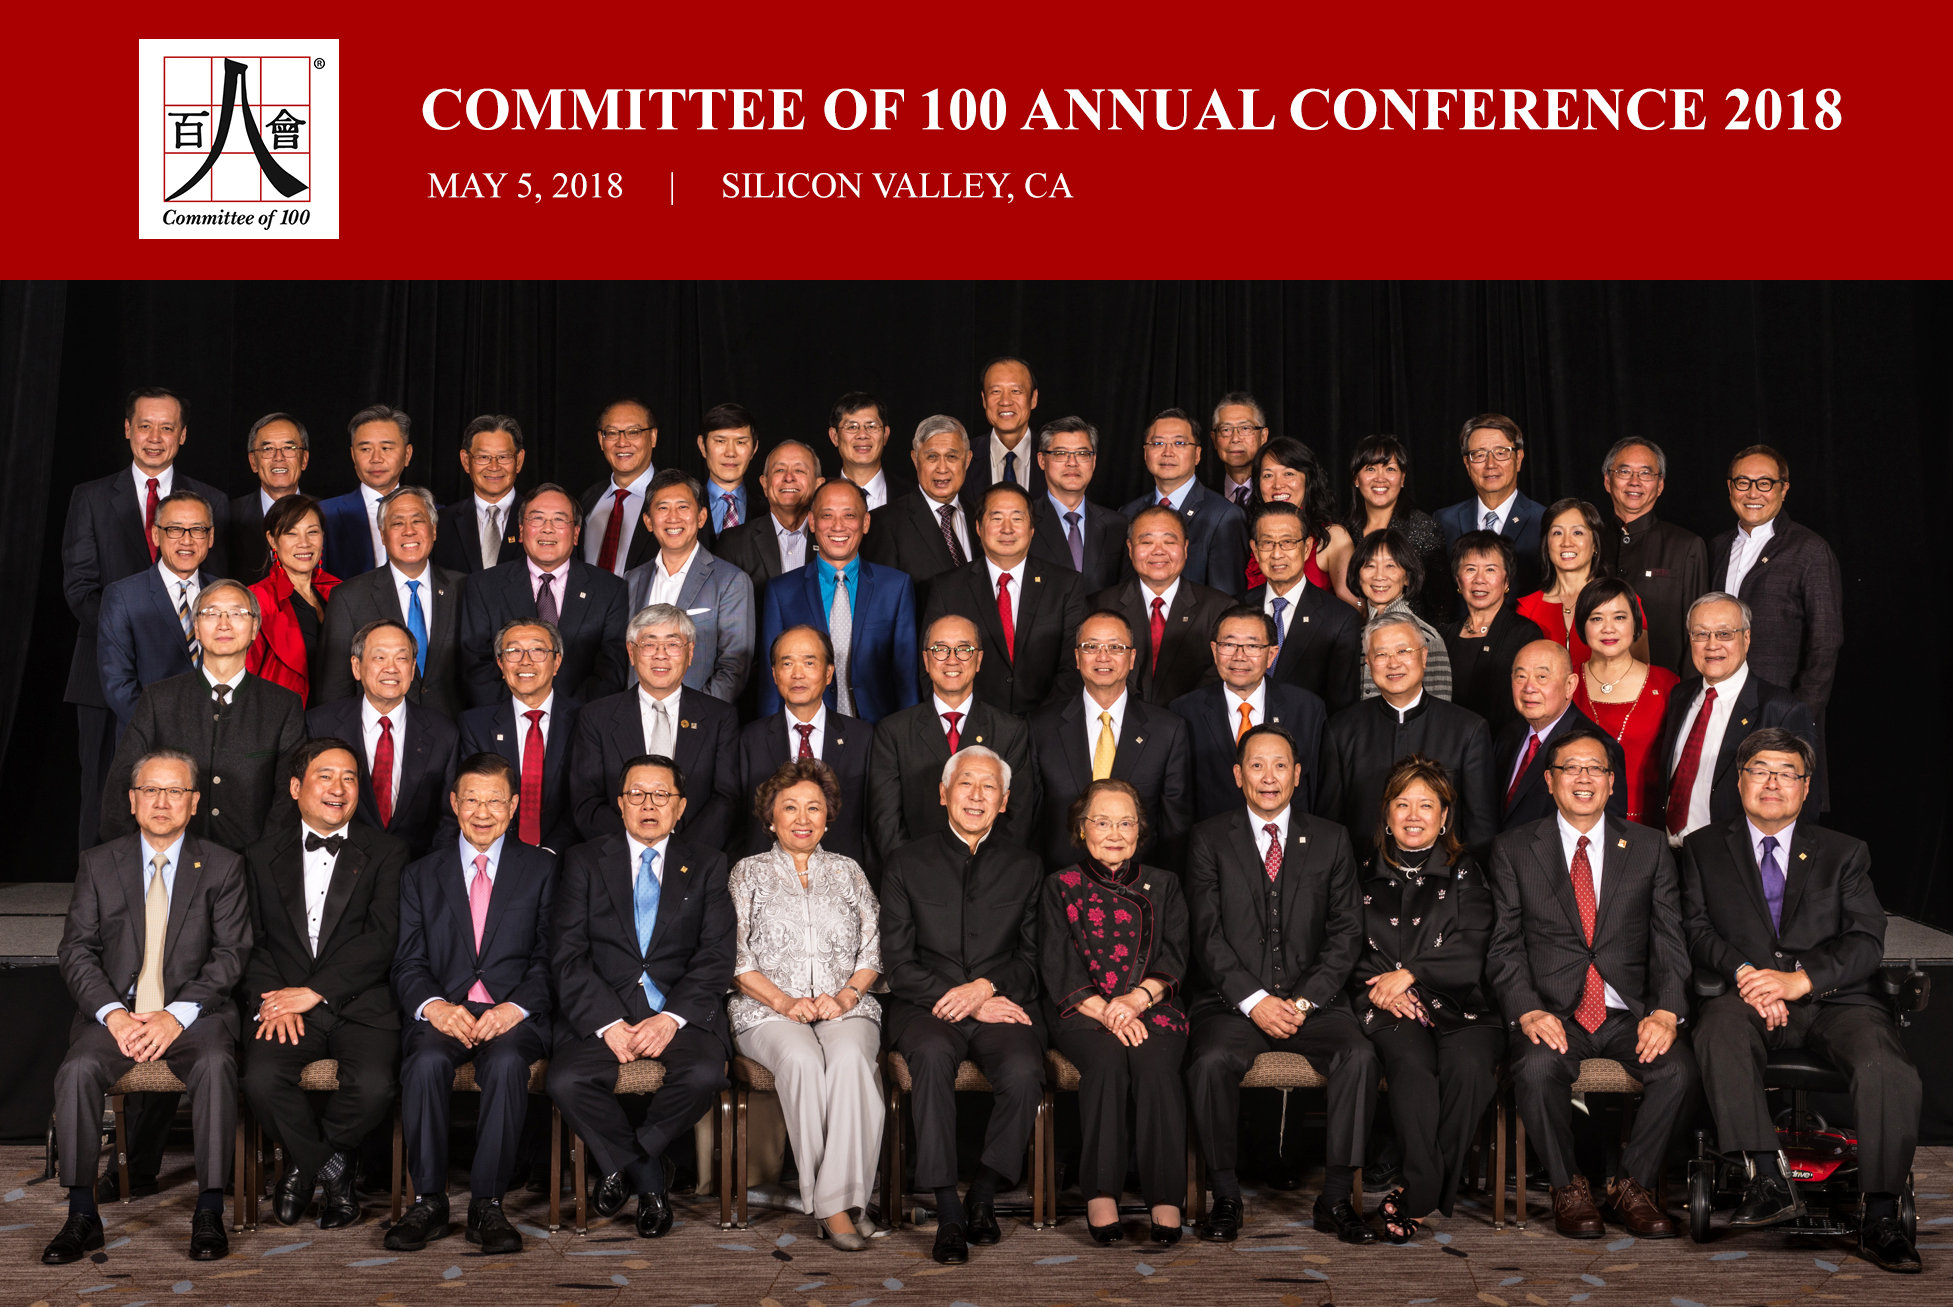 U.S.-China leaders from the Committee of 100 convened in Silicon Valley, discussing U.S.-China economy and Belt and Road Initiative 百人會精英矽谷聚首 研討中美經濟一帶一路